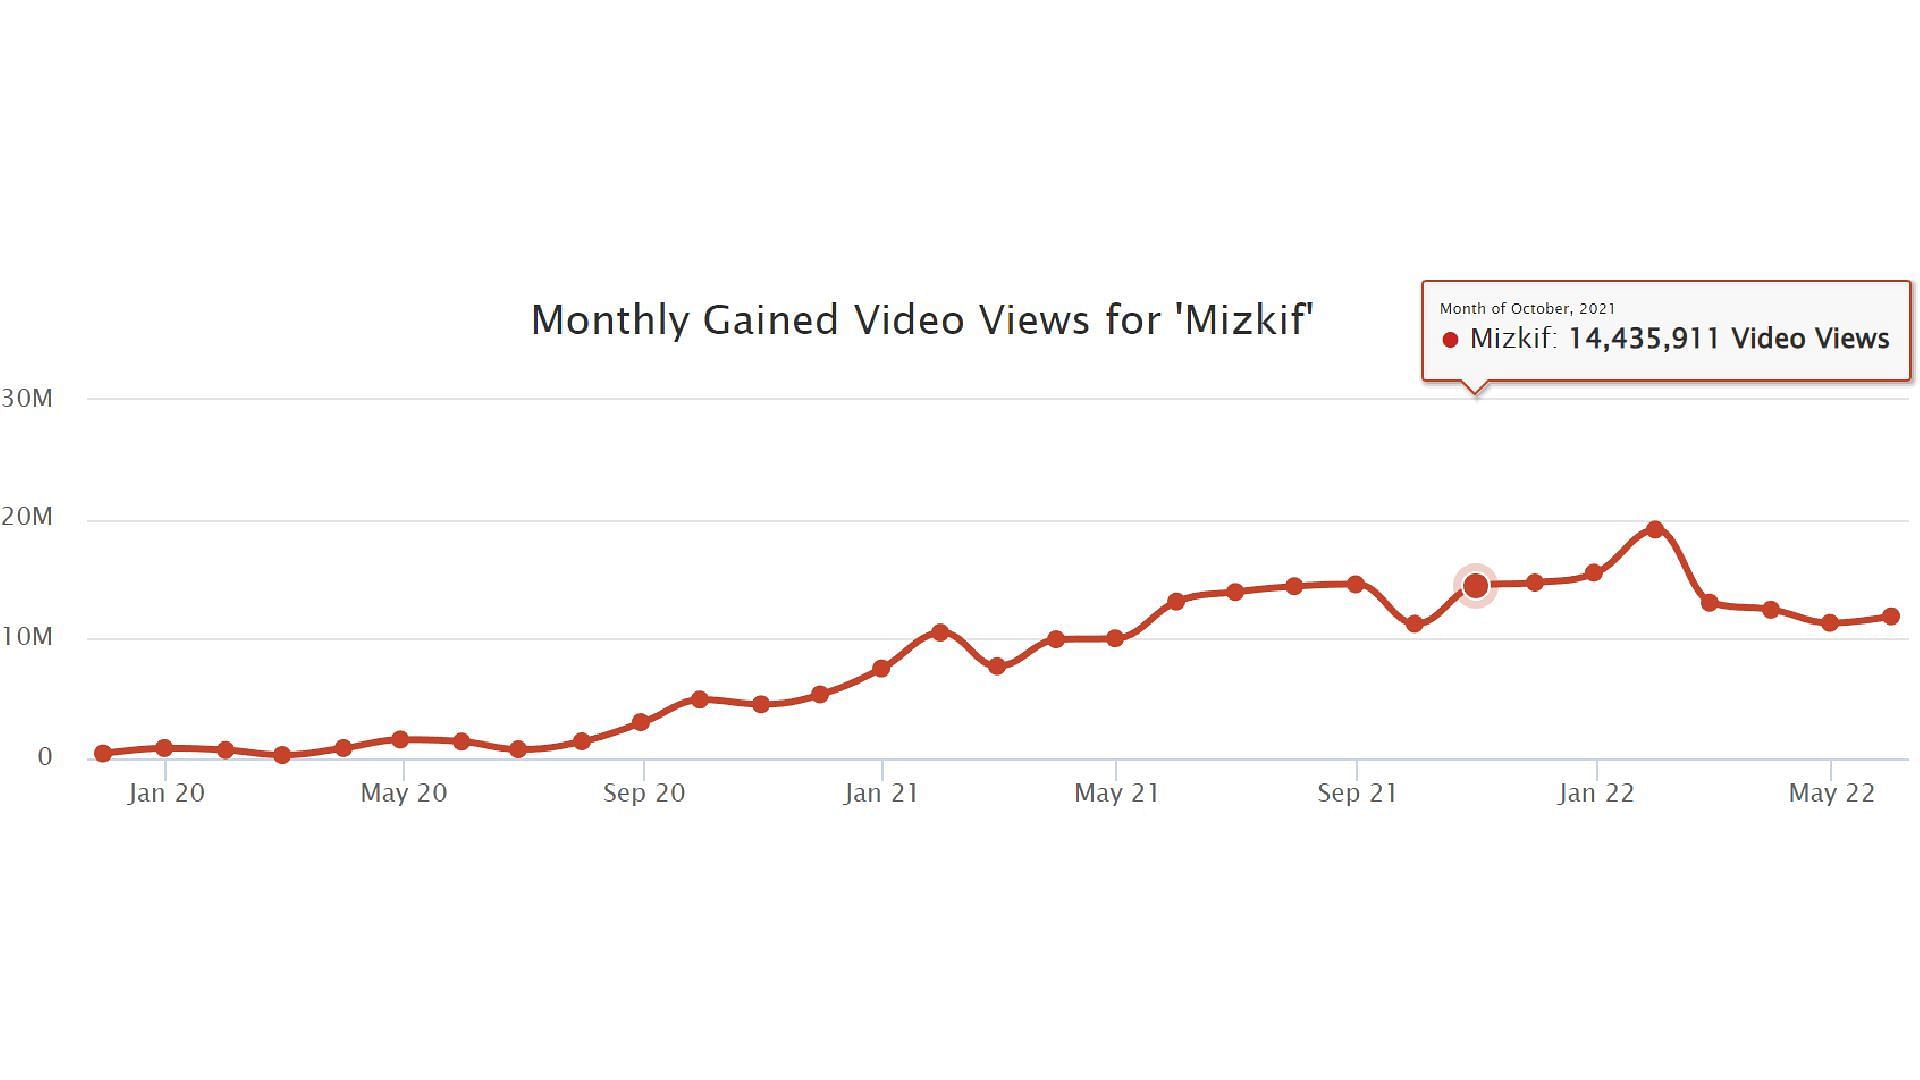 His view count over the years. (Image via SocialBlade)